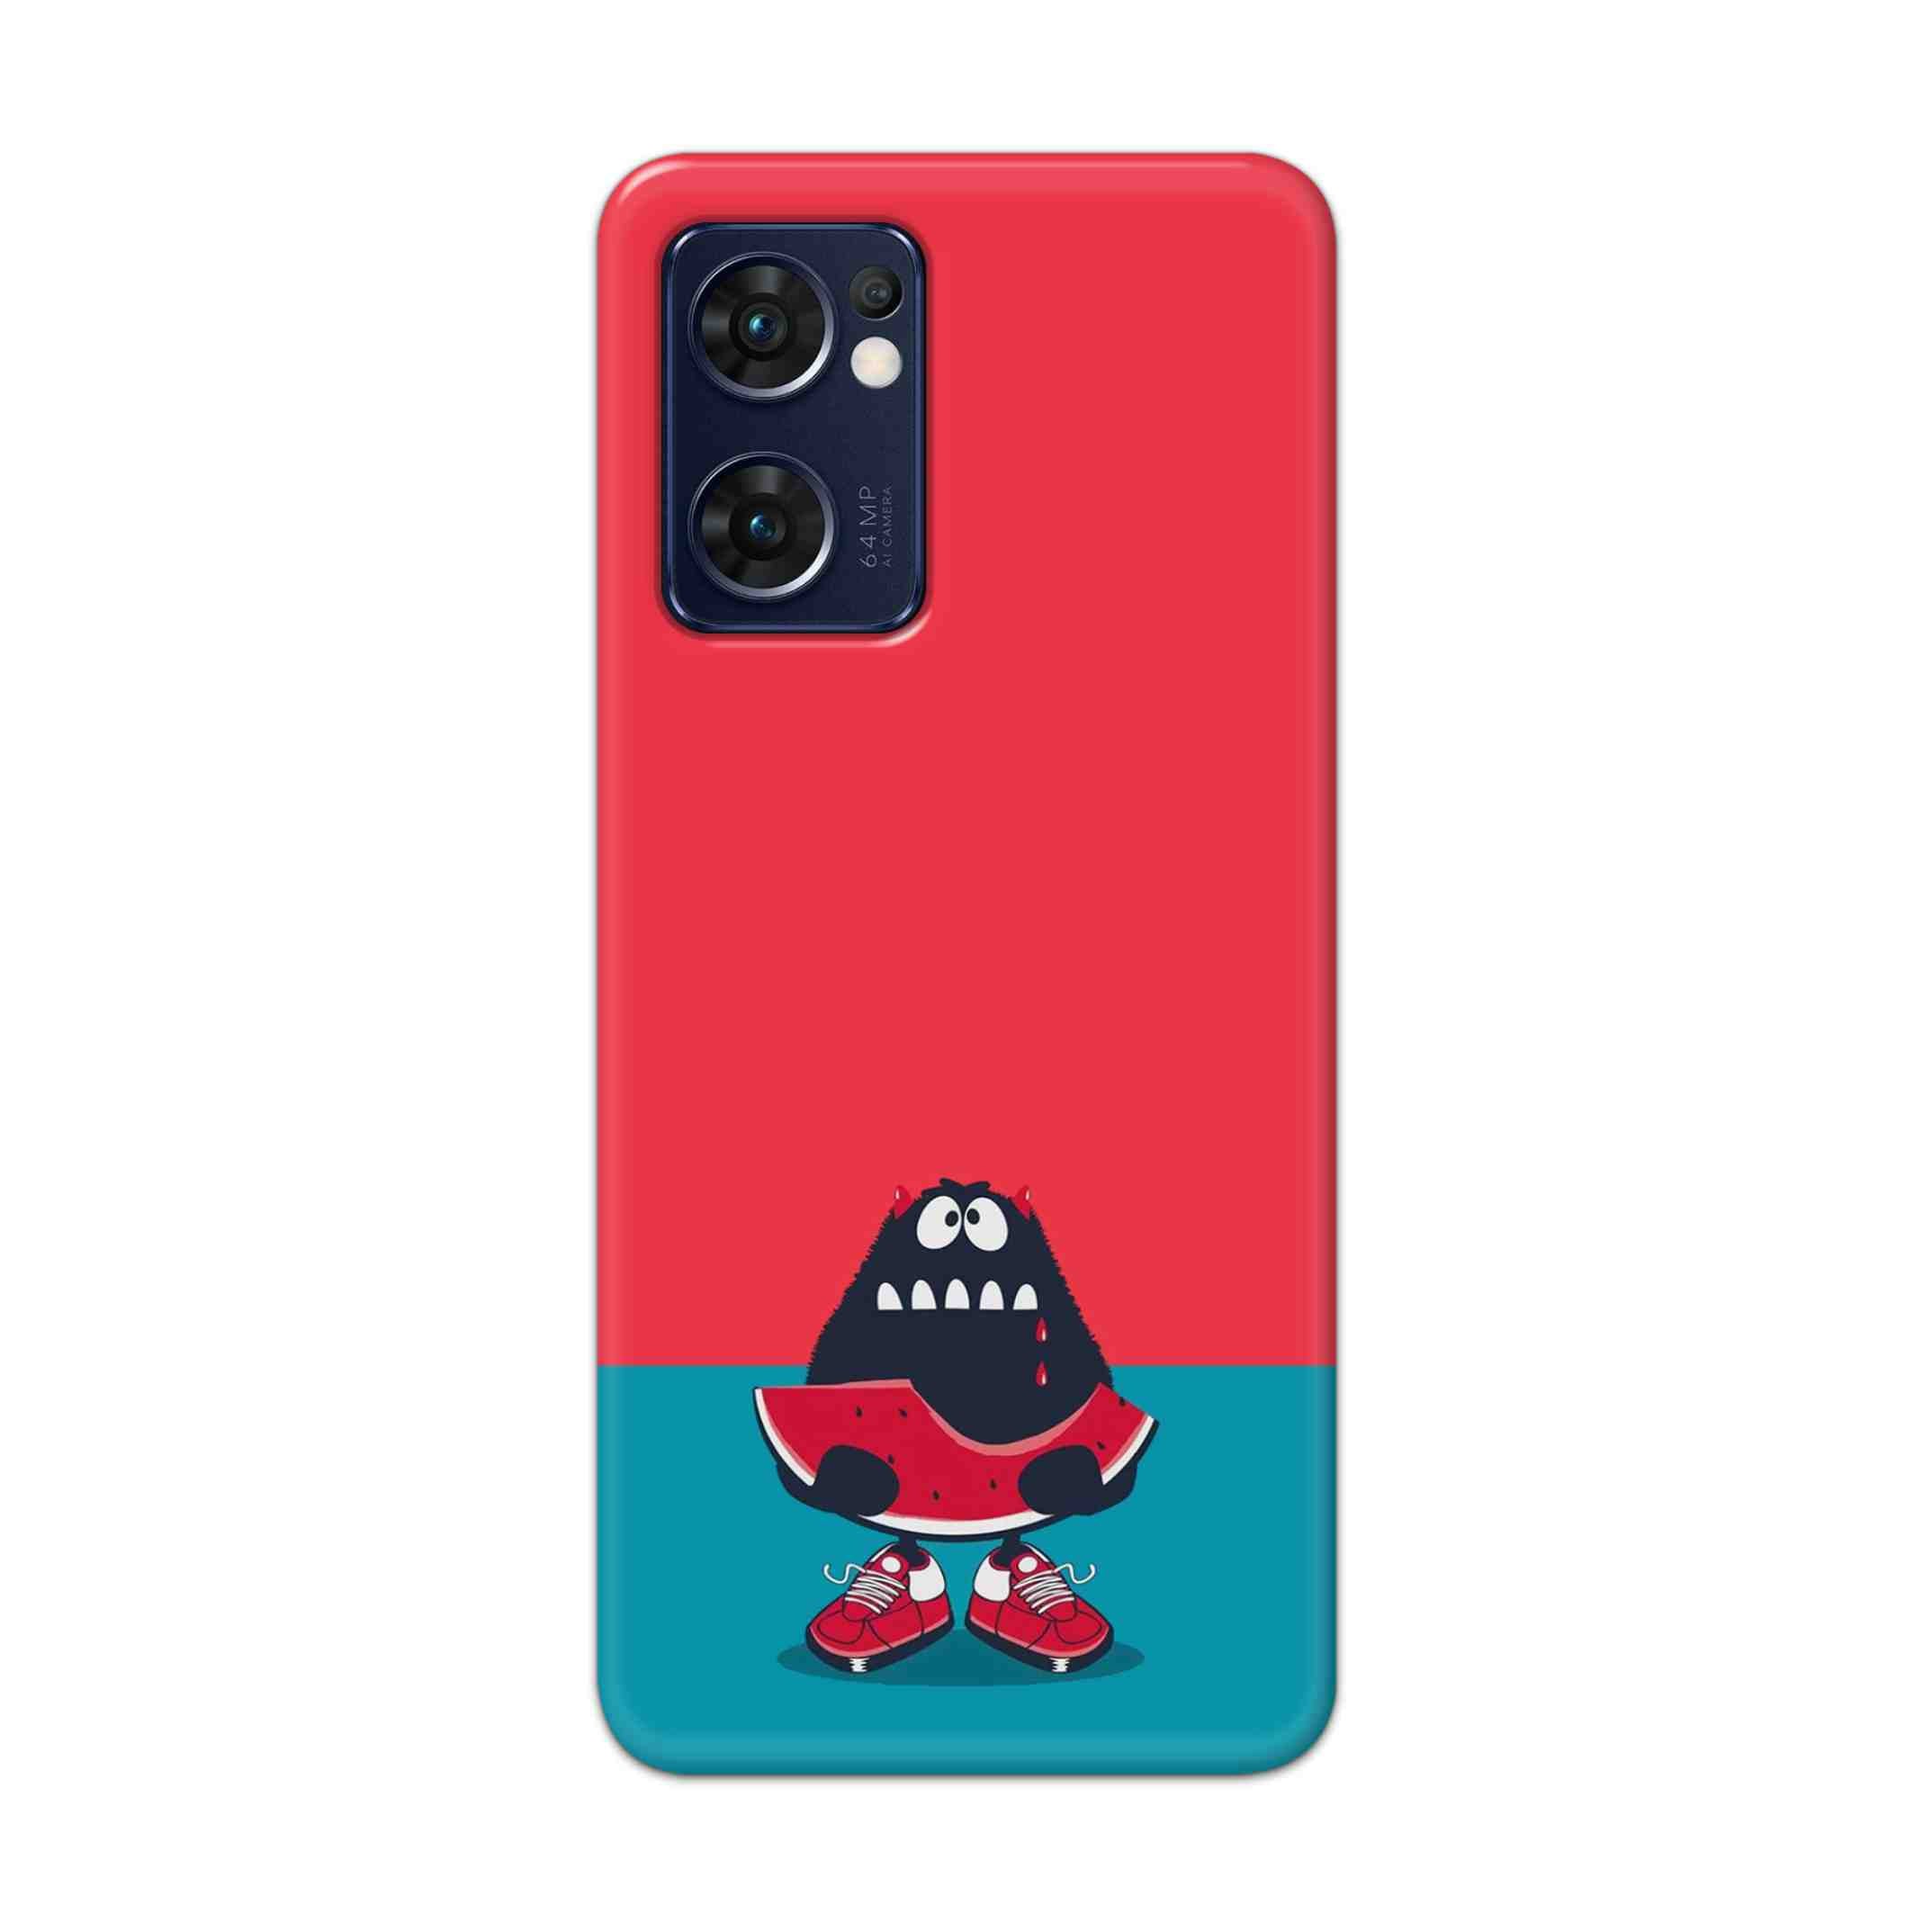 Buy Watermelon Hard Back Mobile Phone Case Cover For Reno 7 5G Online